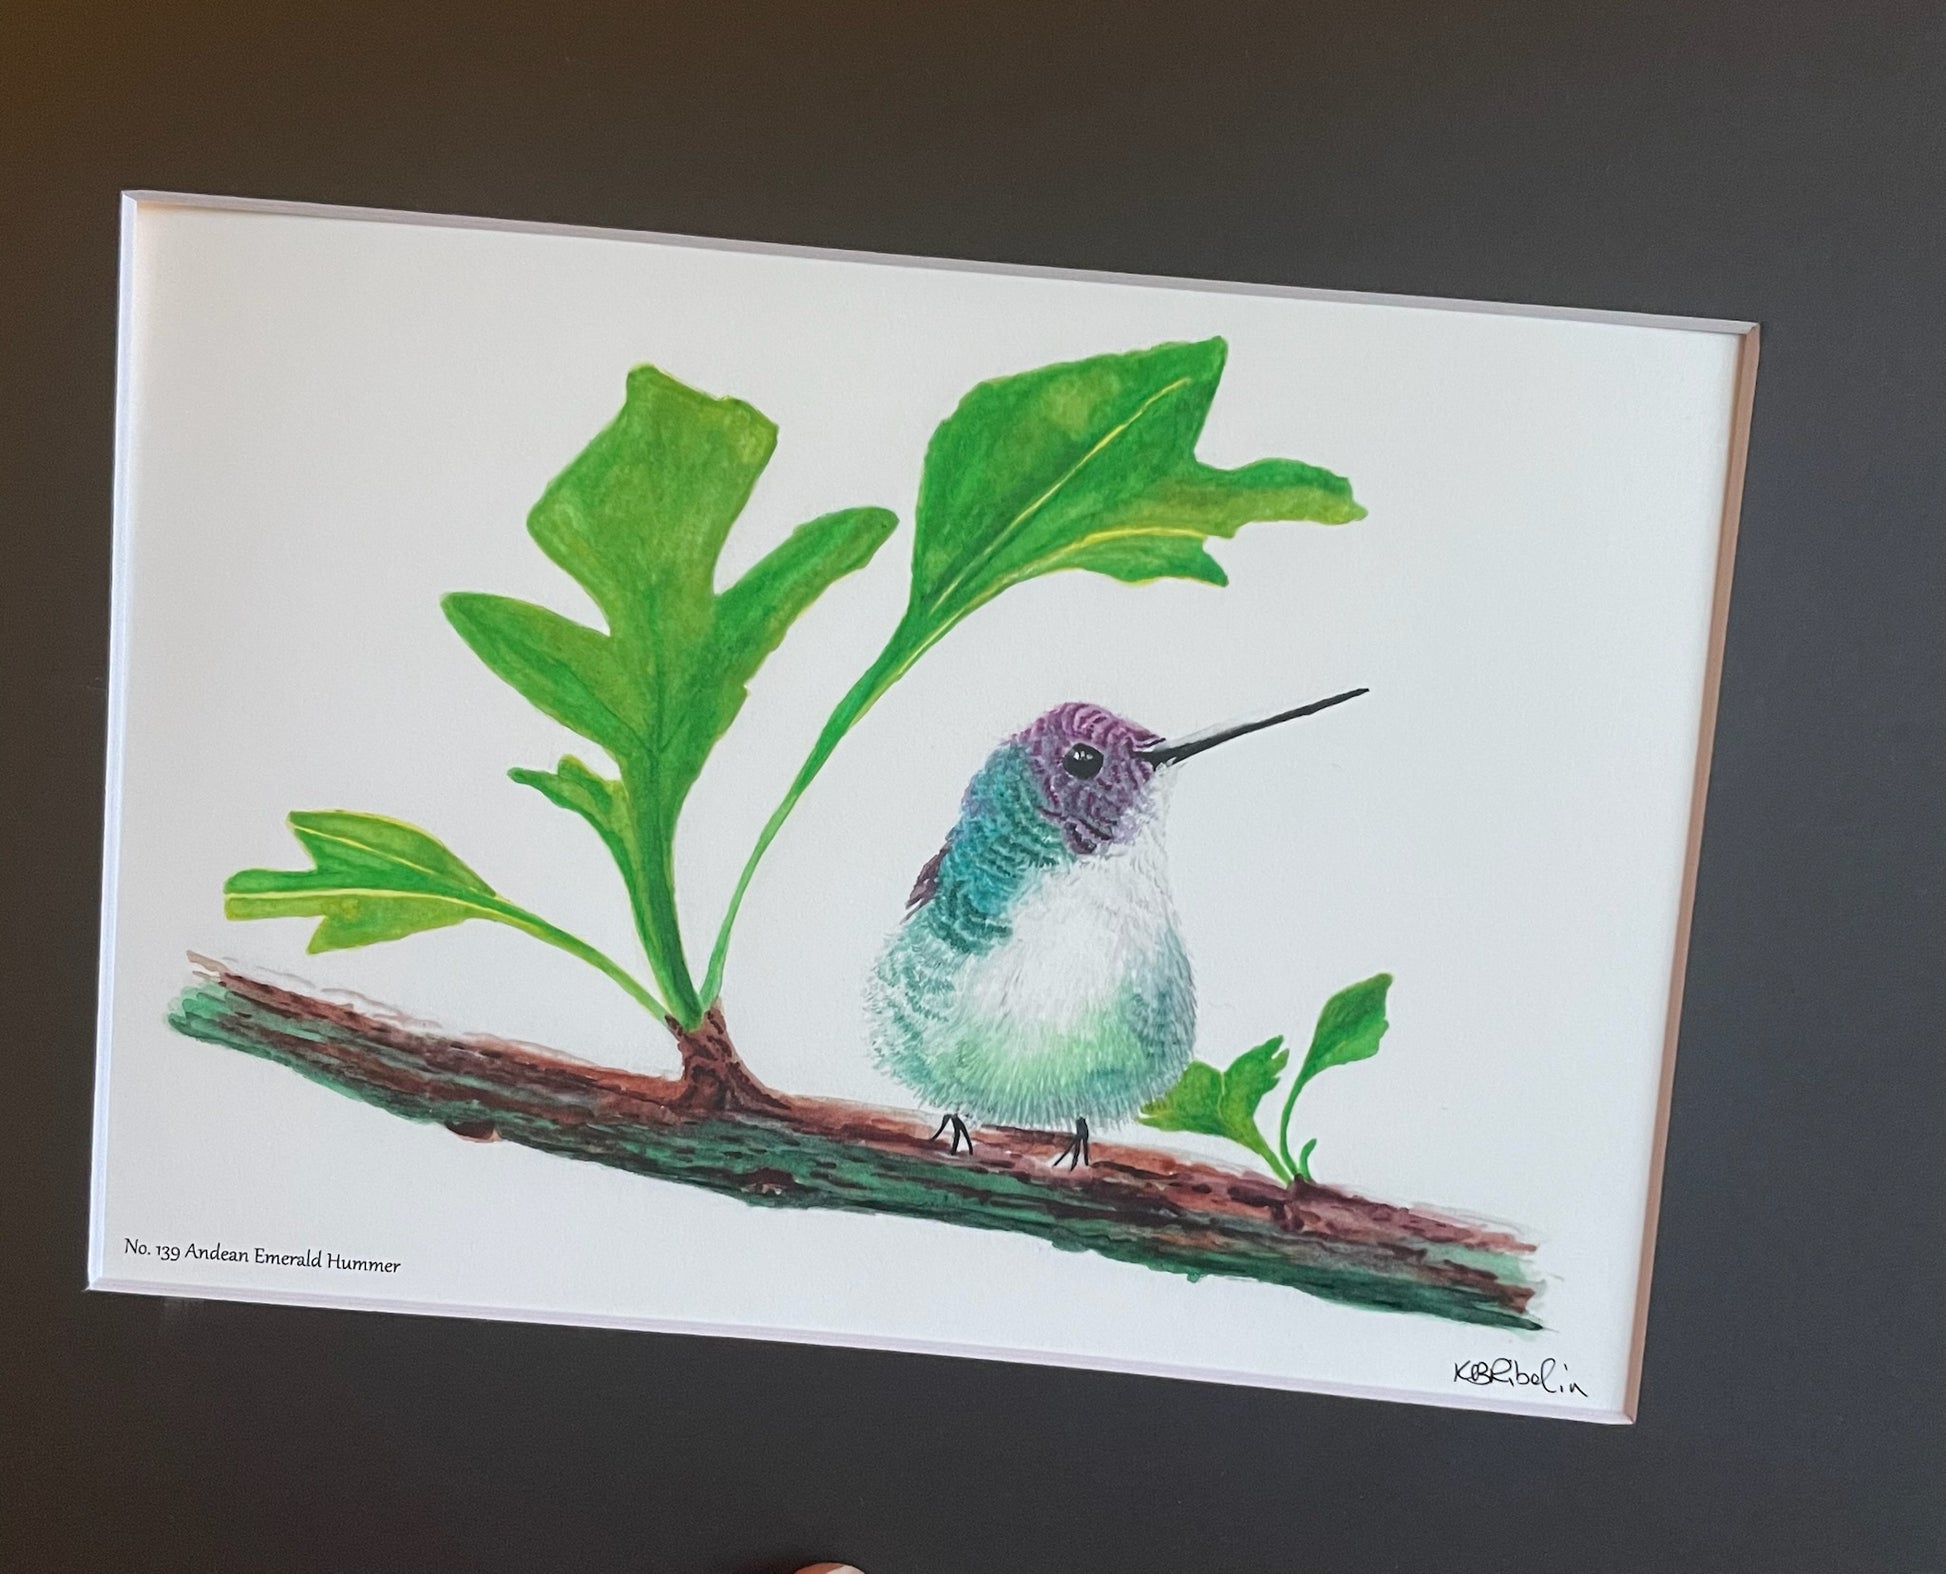 Andean Emerald Hummer - Bird Art by KB - Giclee Print with Black Mat